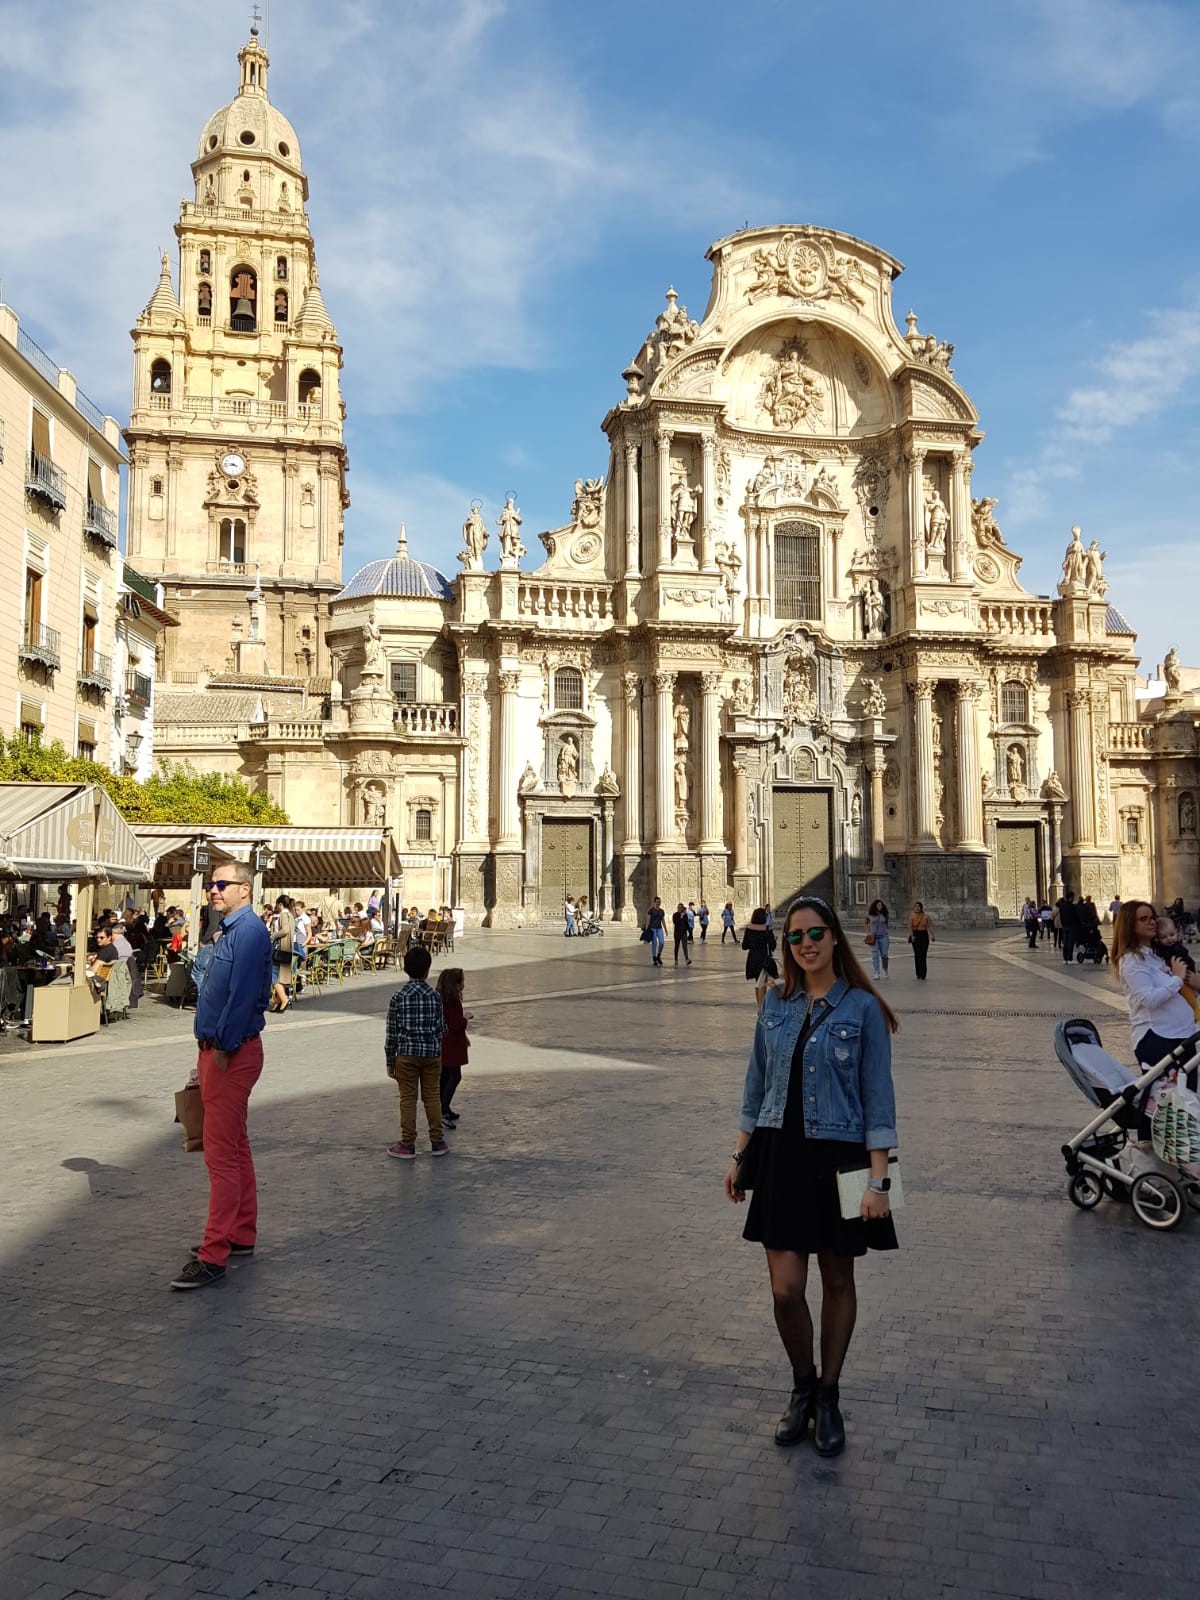 Murcia’s cathedral is something truly unique.